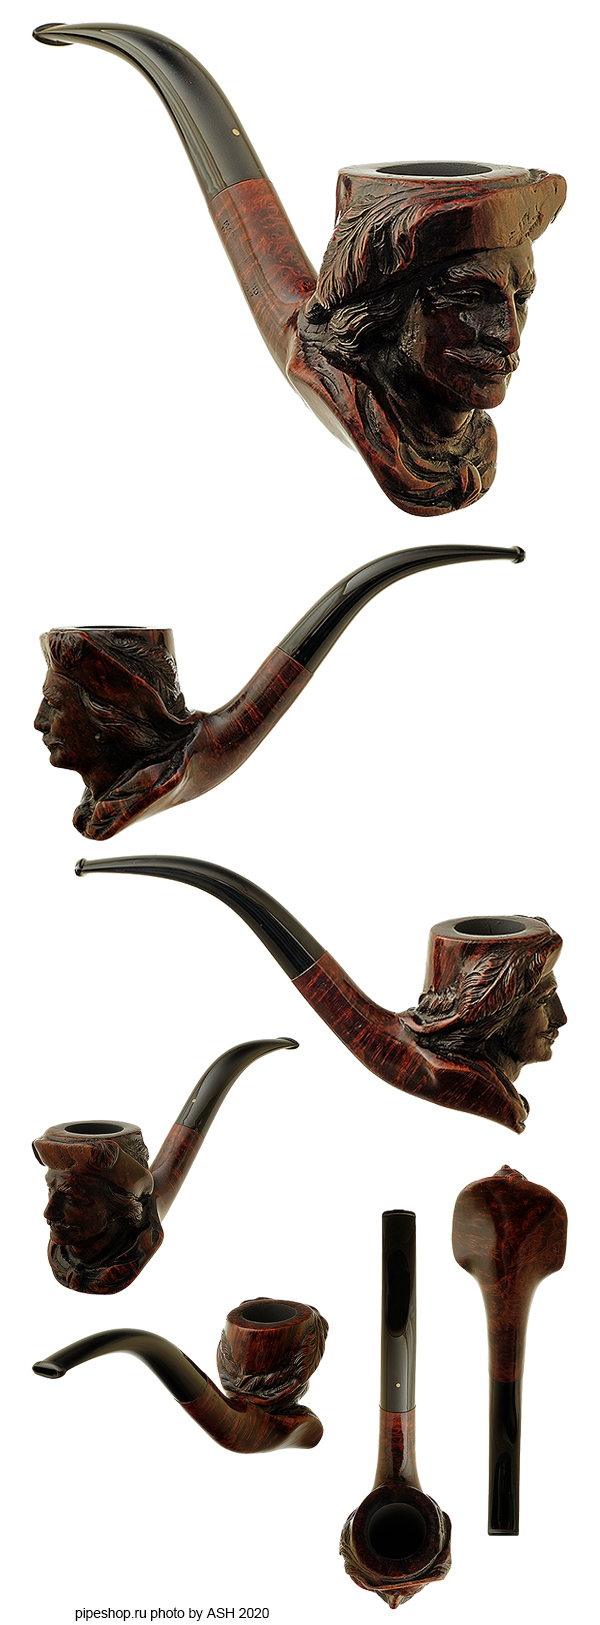   DUNHILL SMOOTH PATENT CARVED CAVALIER ESTATE (1937)